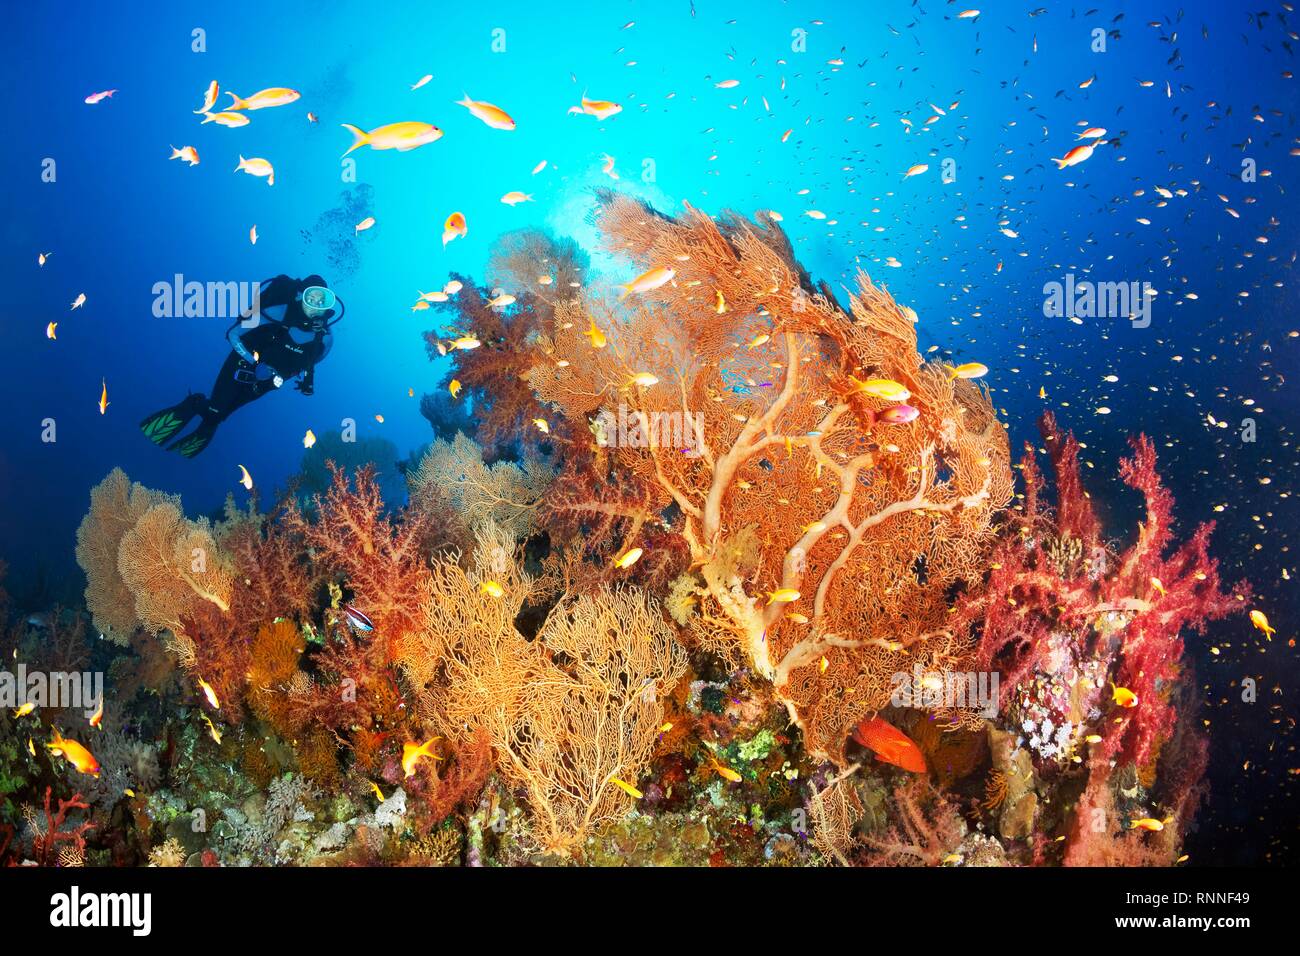 Diver looking at reef top with group of gorgonians (Annella mollis) Klunzinger's Soft Corals (Dendronephthya klunzingeri) and Stock Photo